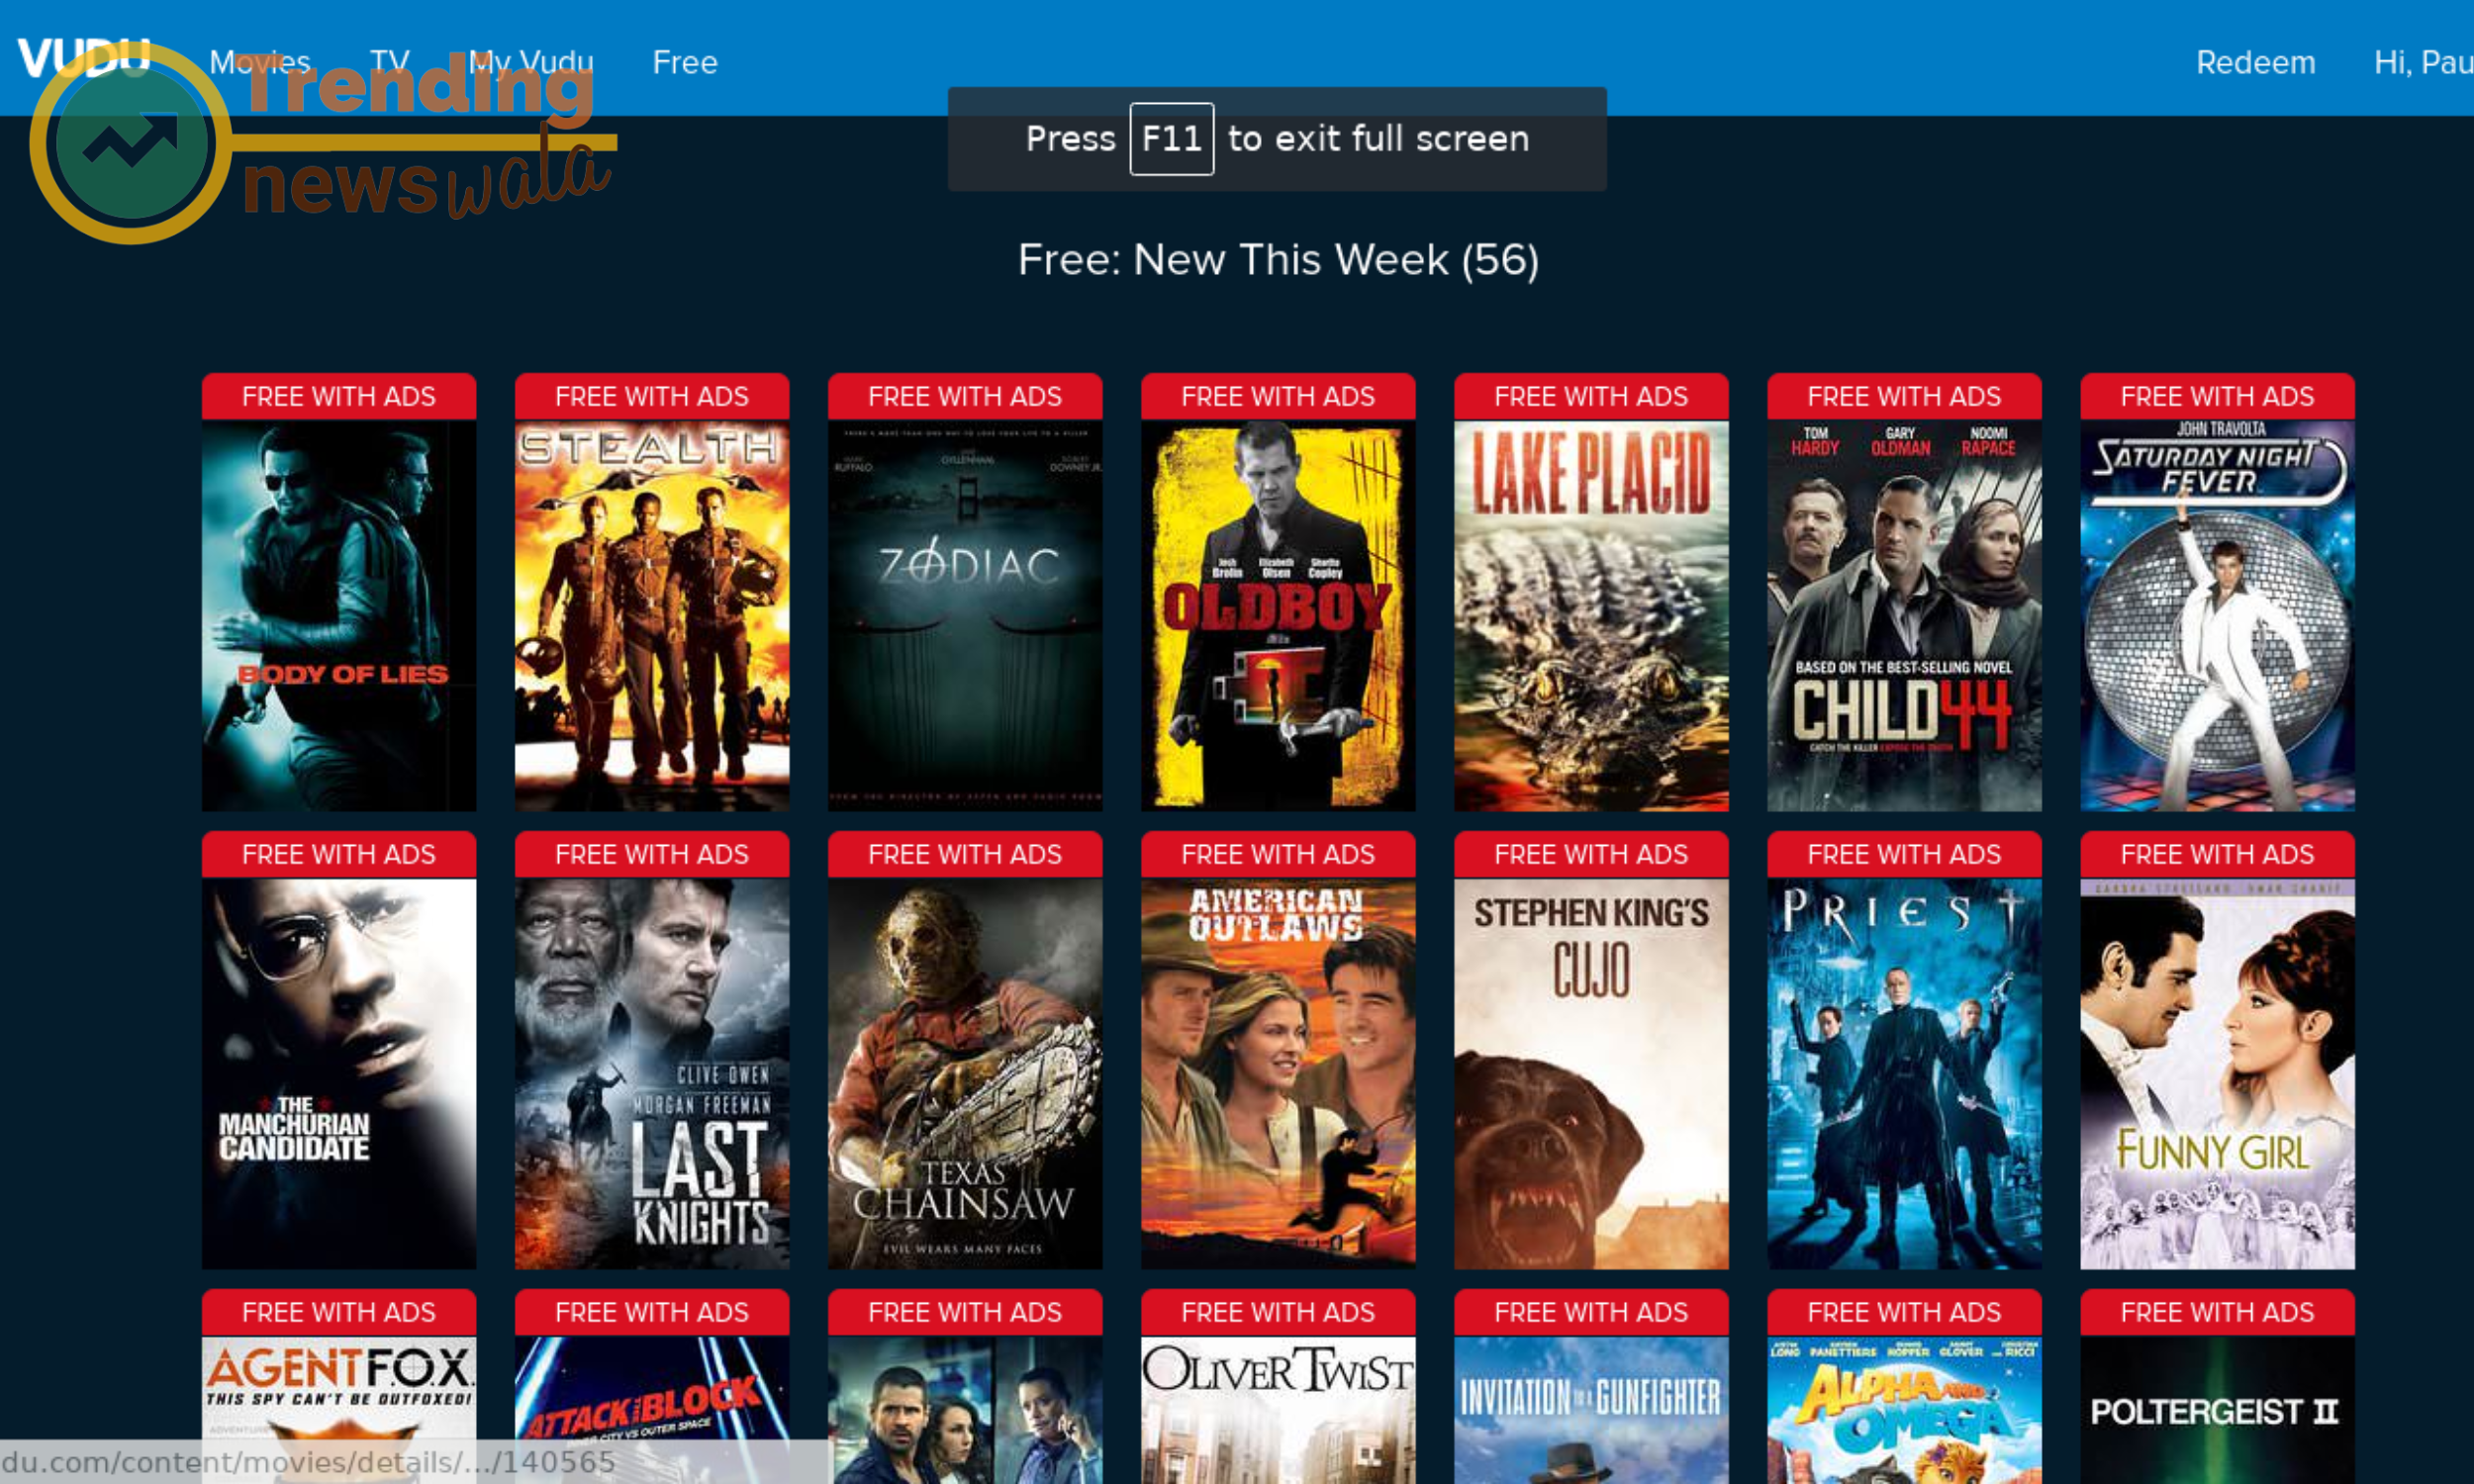 Vudu, known for its rental and purchase options, also offers a selection of free movies with limited ads